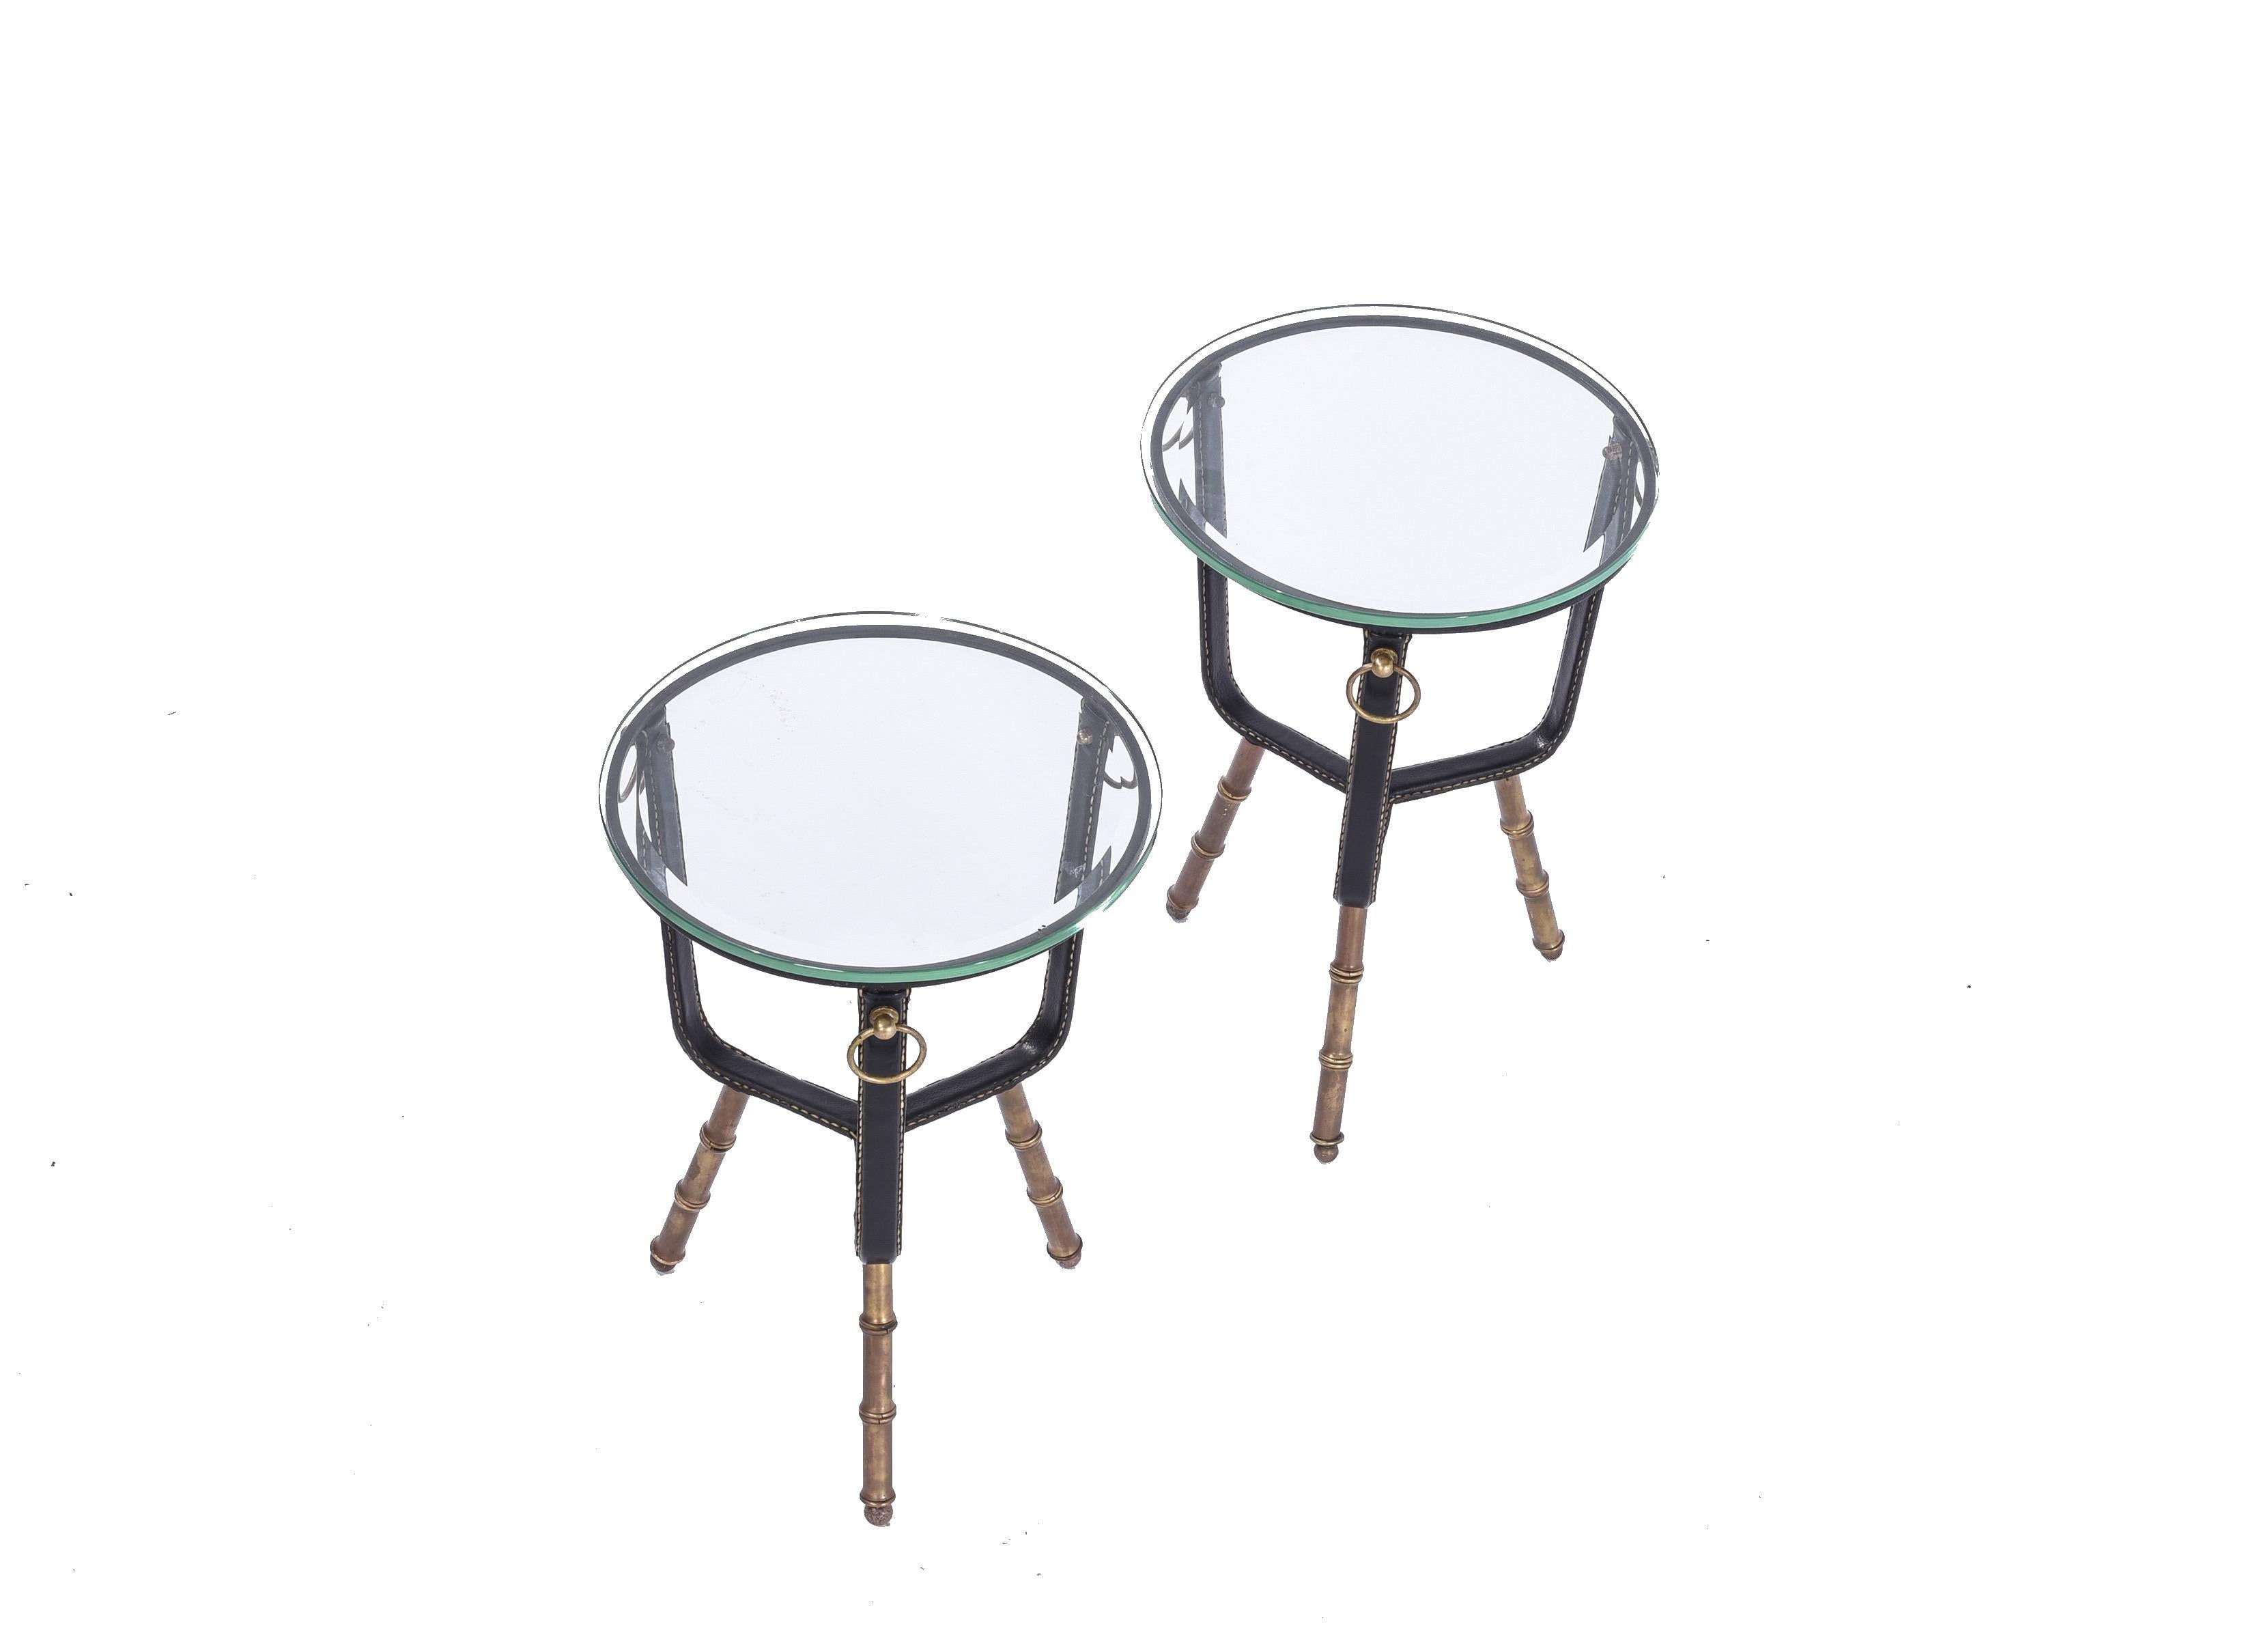 Jacques Adnet pair of side tables, France, 1960s. Stitched leather, enameled iron, brass, glass.